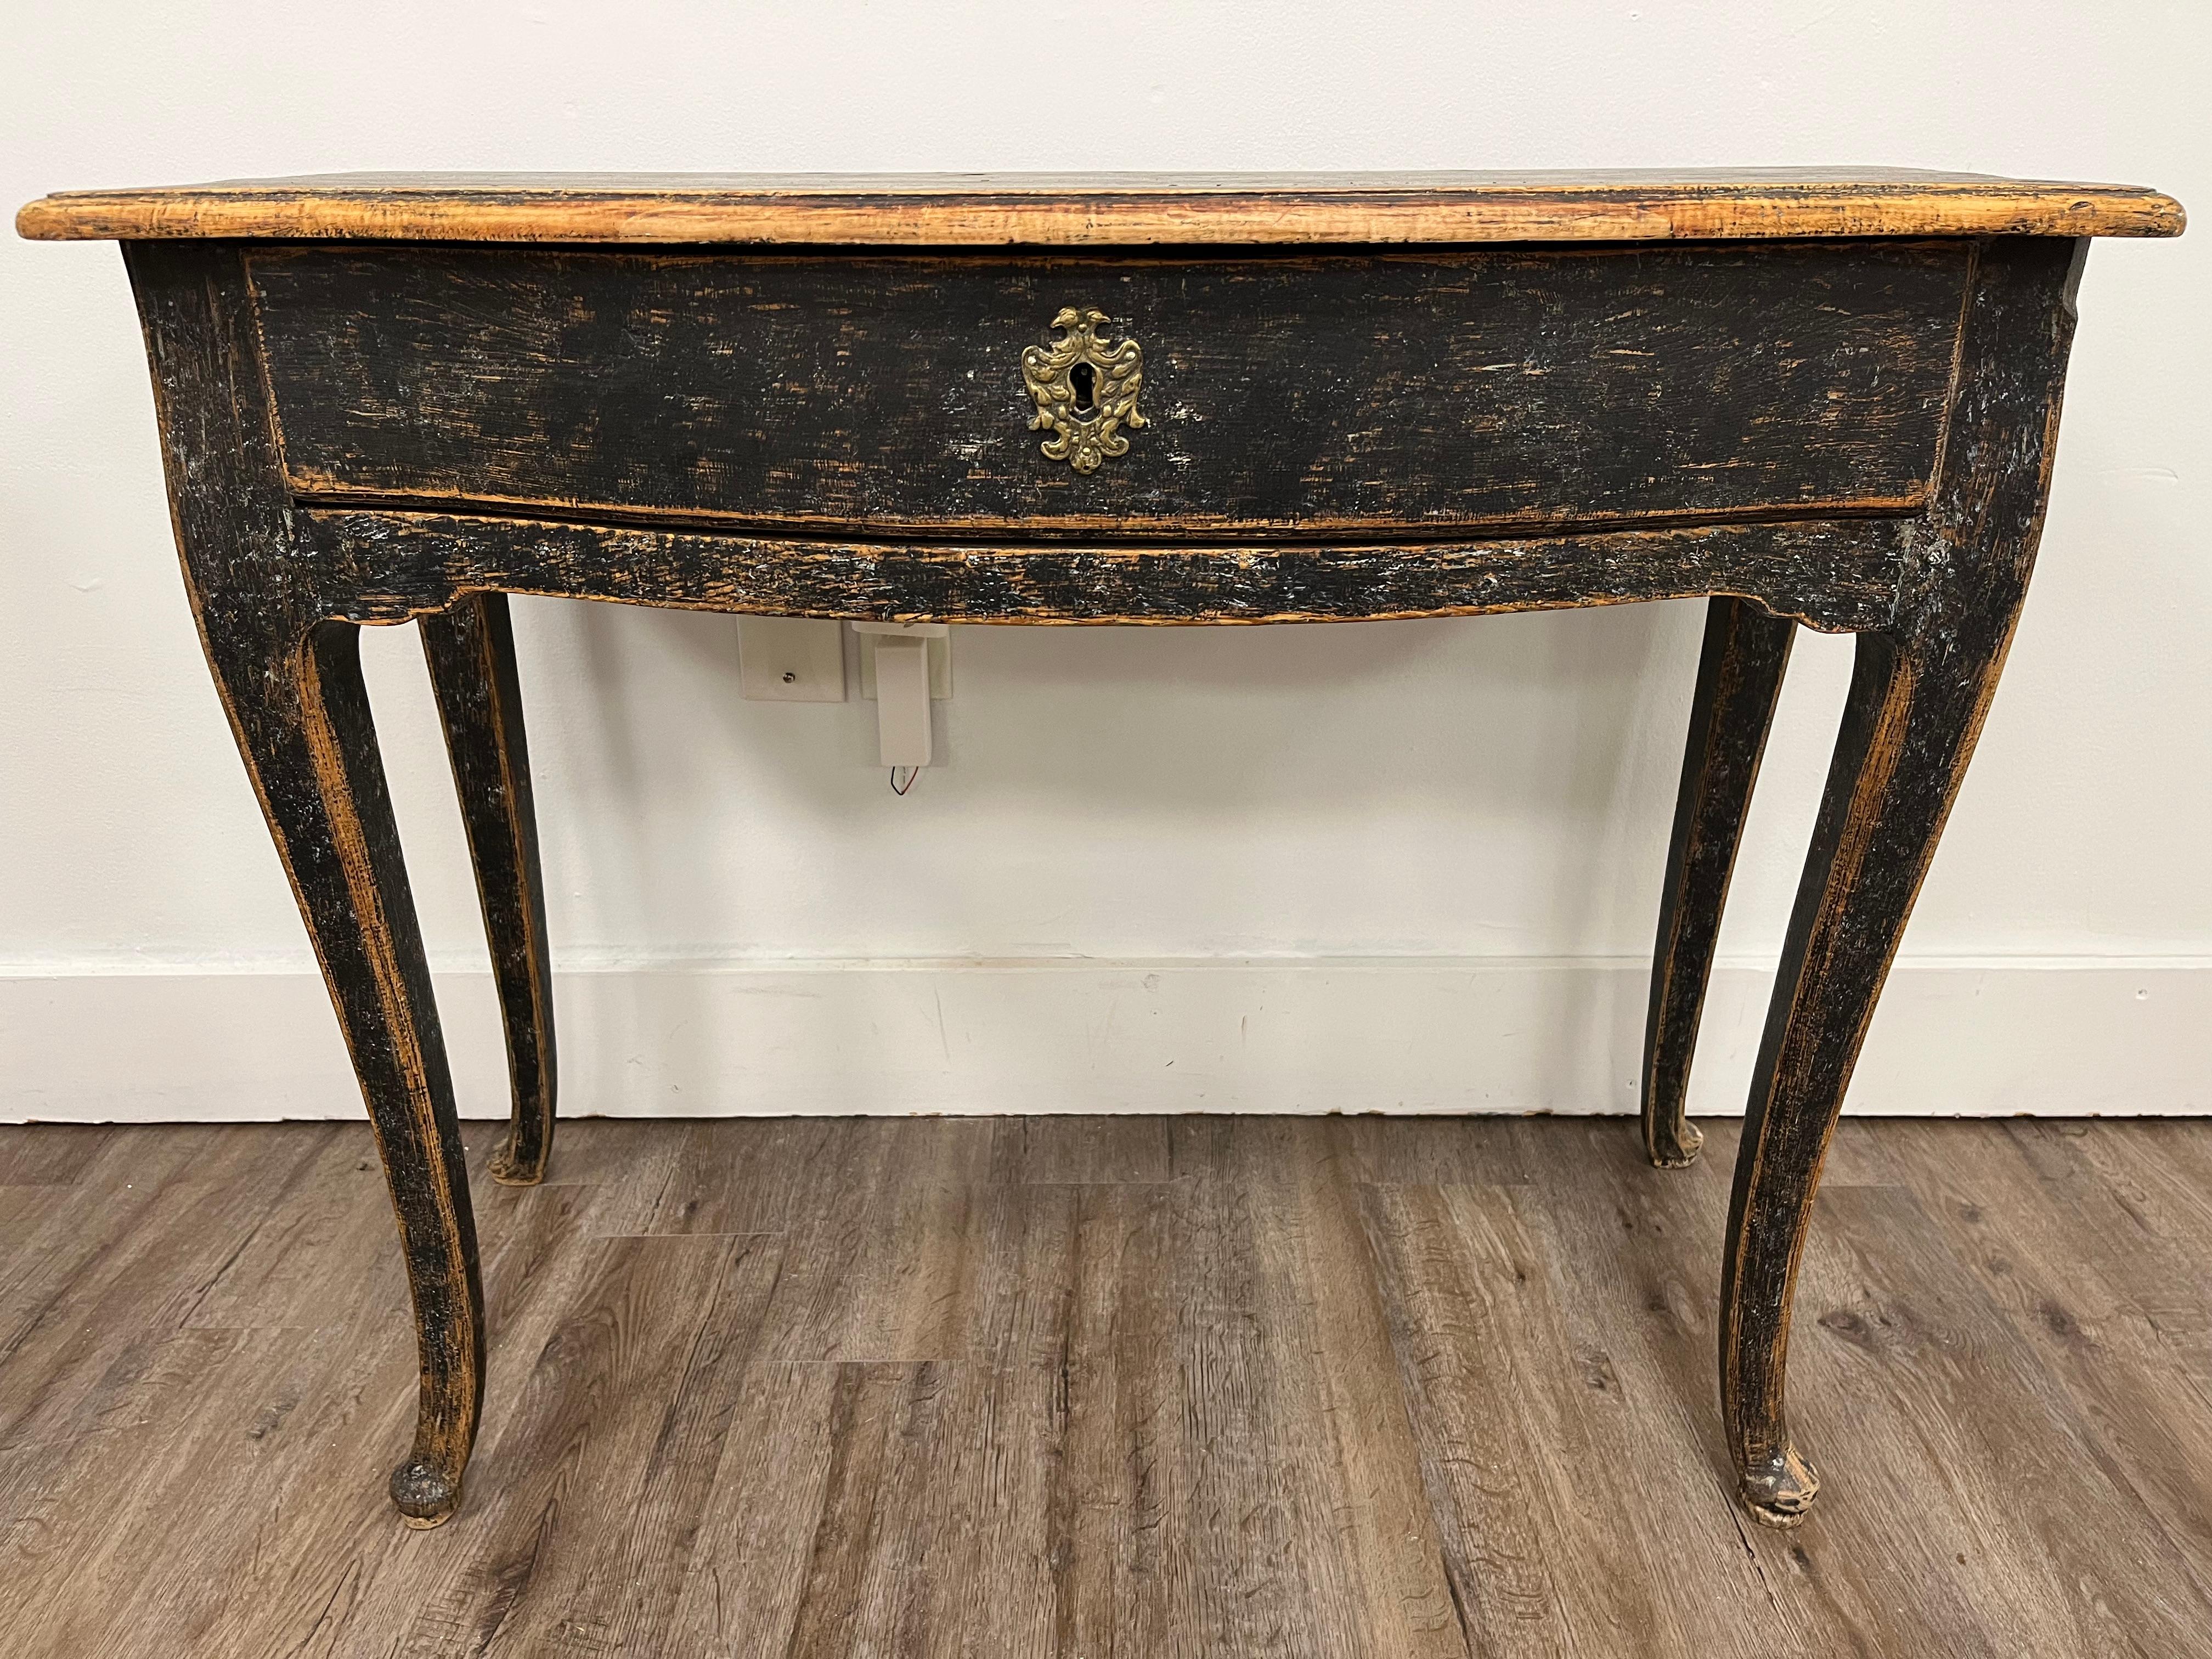 A Swedish Rococo console table with bow front shape and single drawer retaining its original brass hardware and iron lock. Tastefully repainted in black with traces of original blue paint inside the drawer. Sits atop cabriole legs.